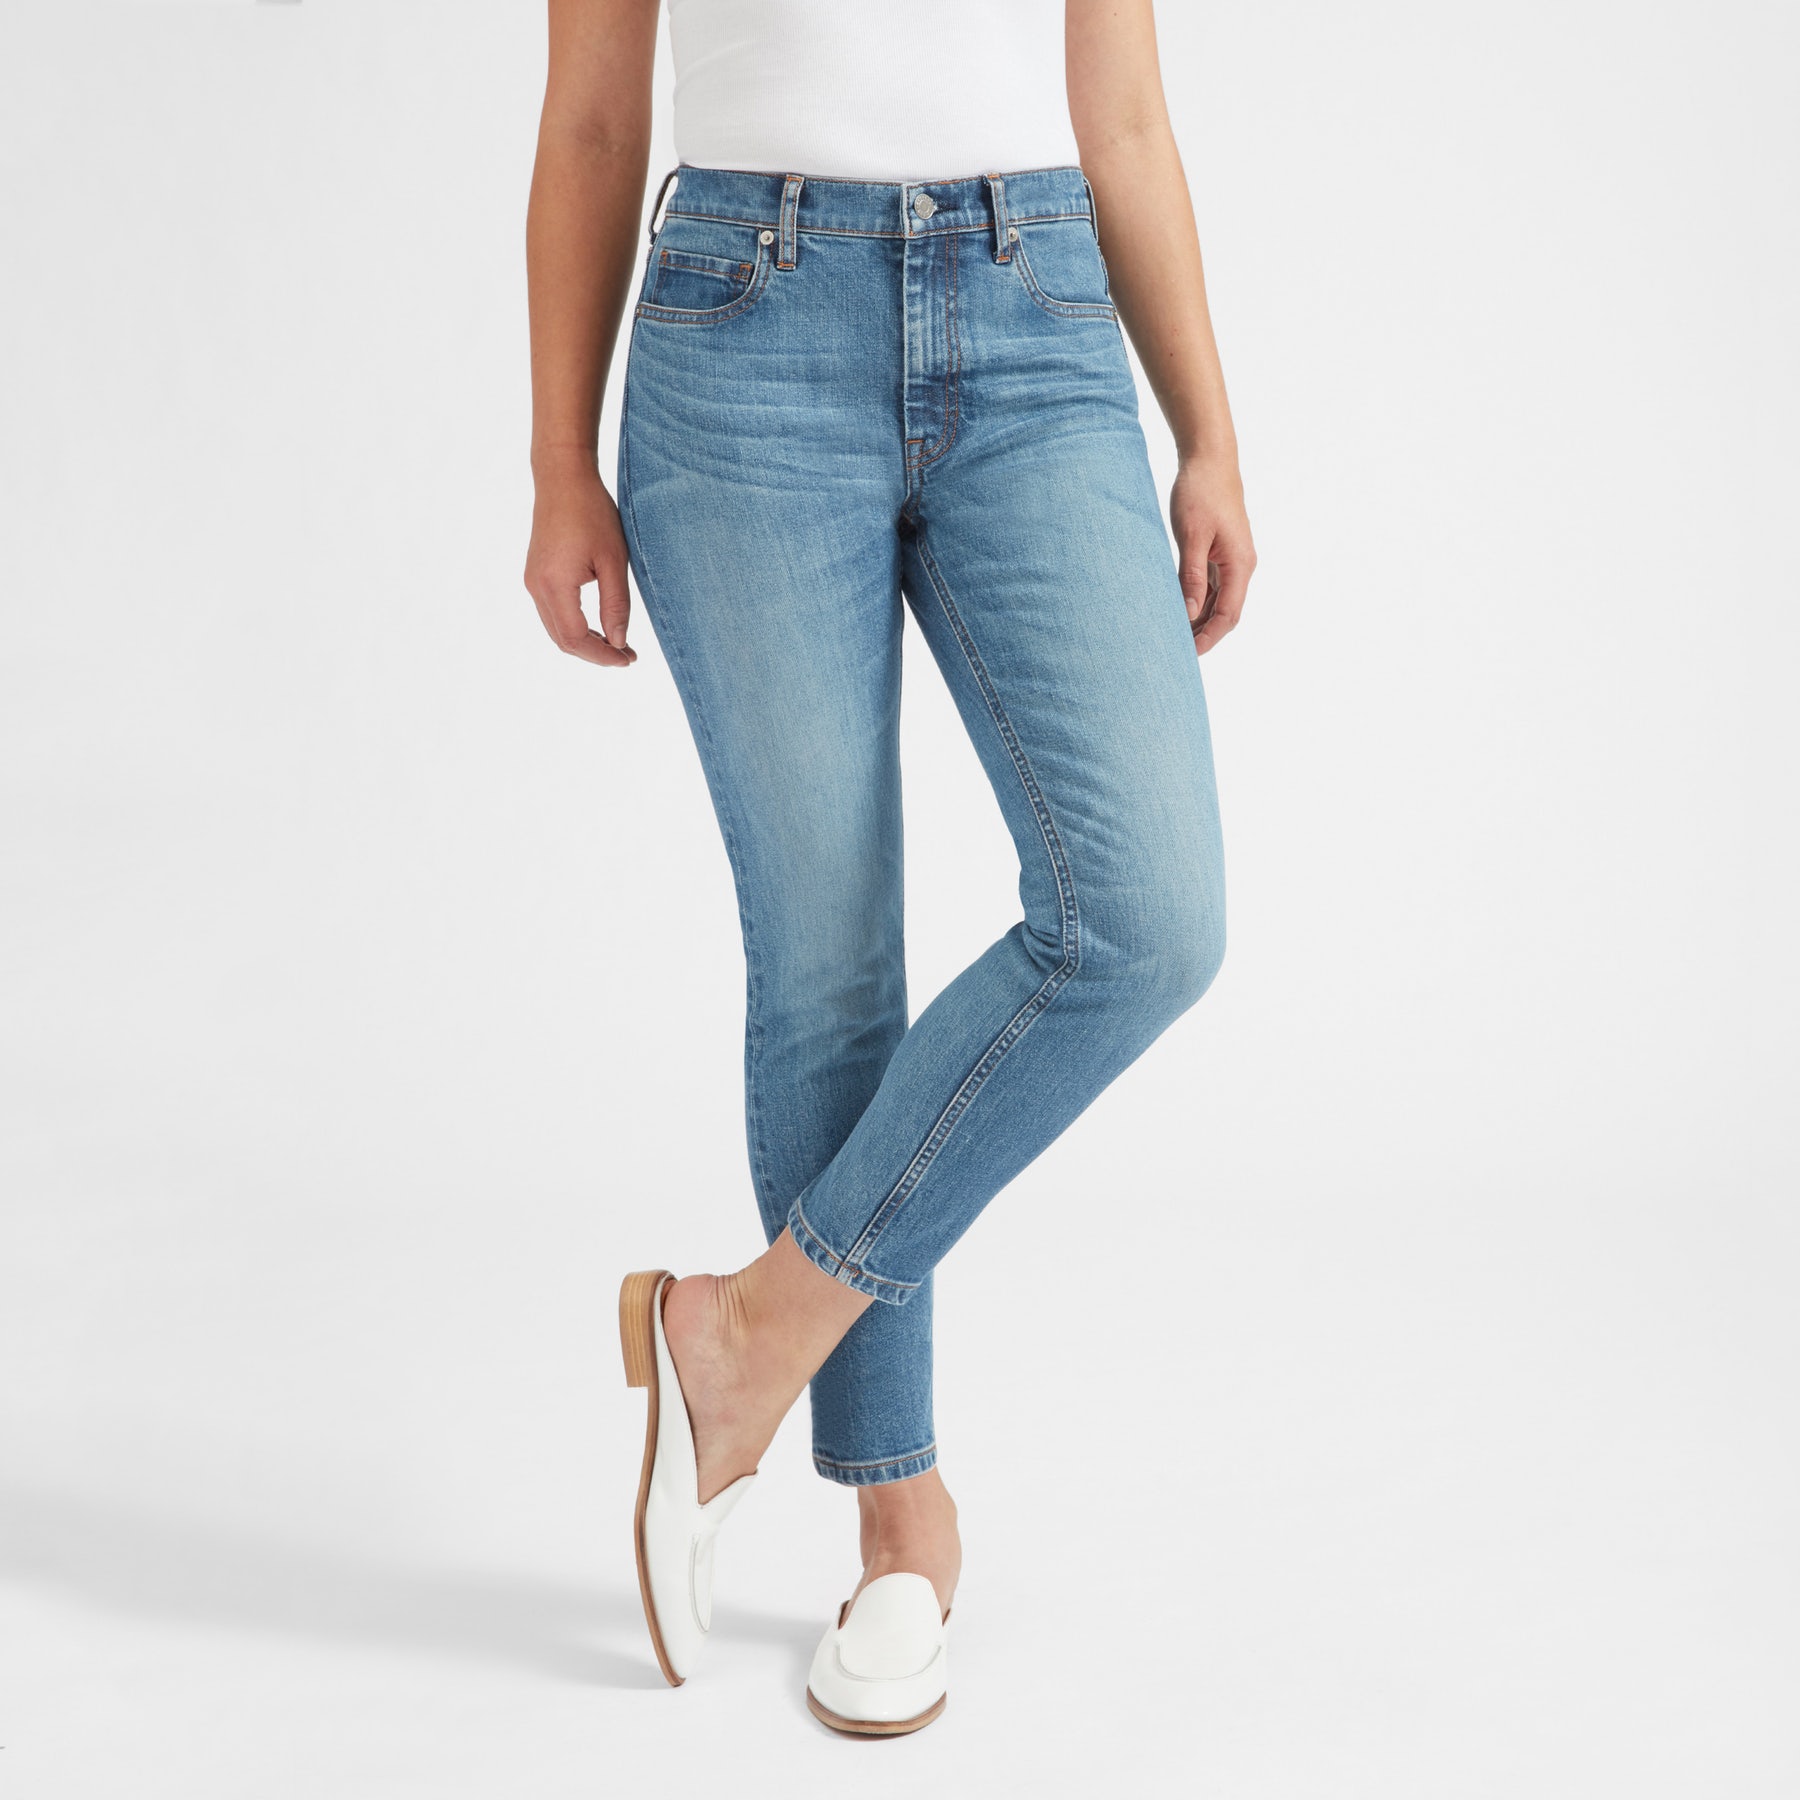 Everlane Denim Review (#notsponsored, Just Fangirls) | And Then We Tried